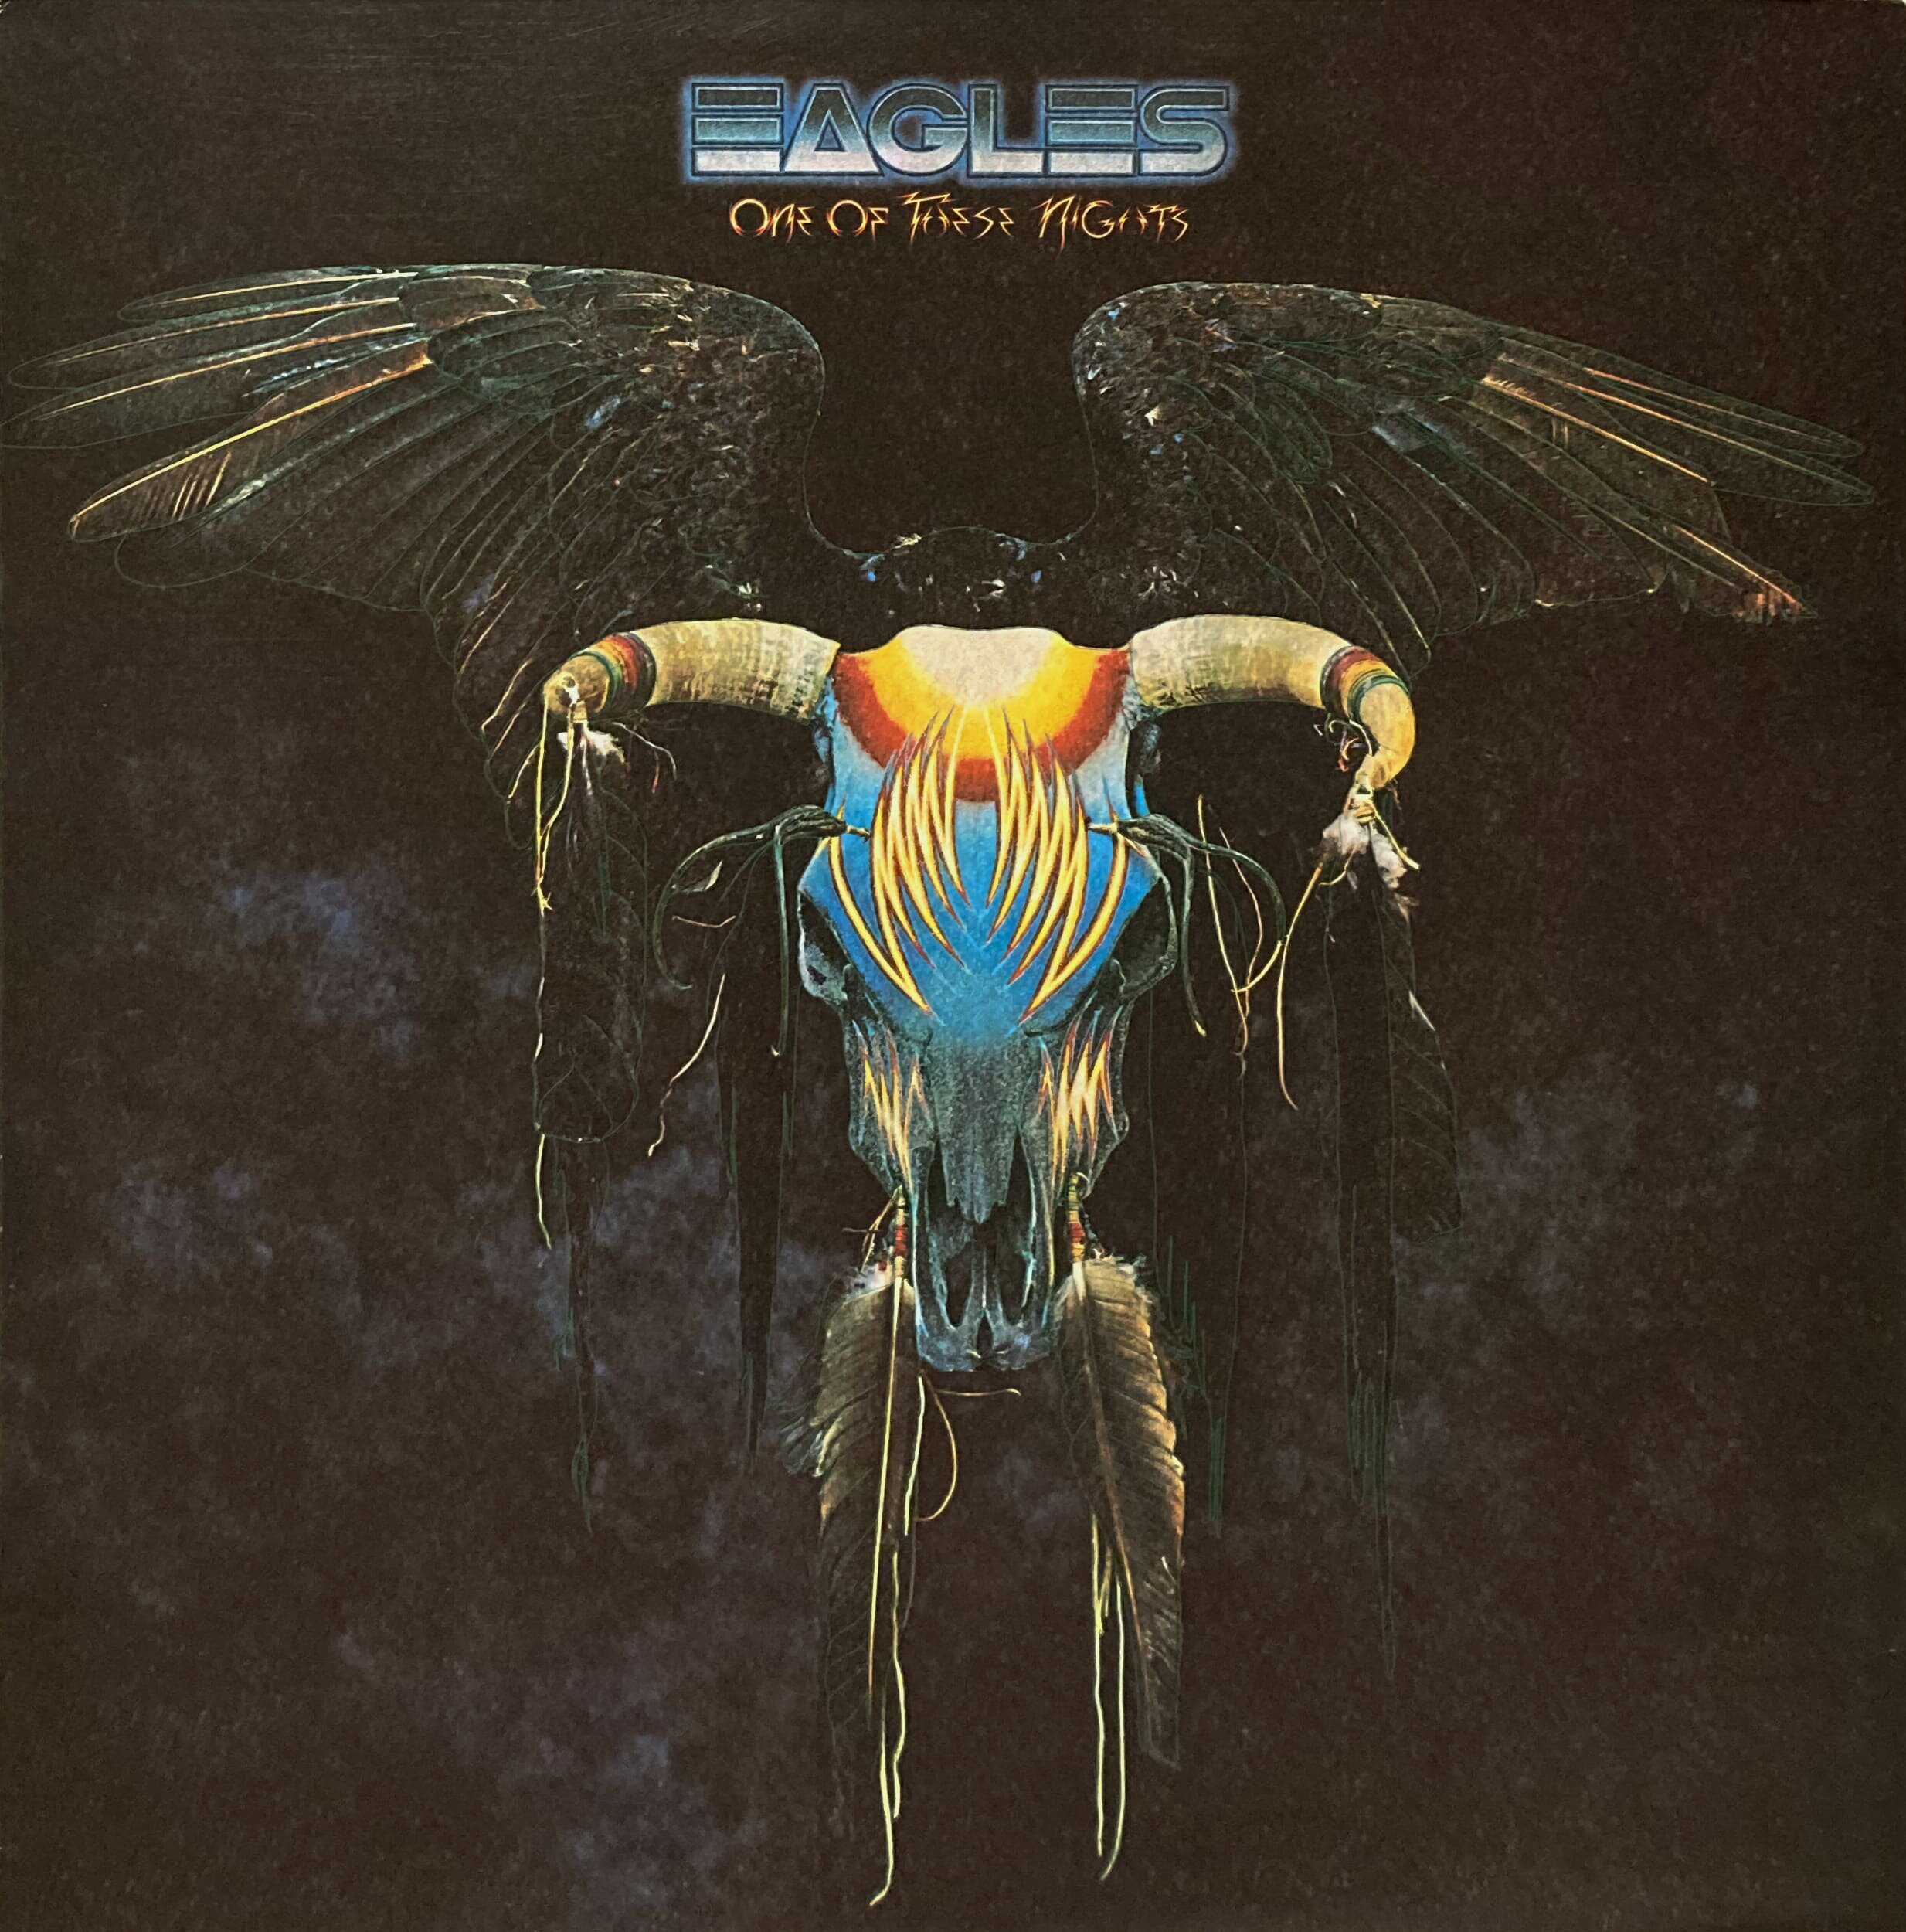 Eagles – Hell Freezes Over (Album Review) — Subjective Sounds